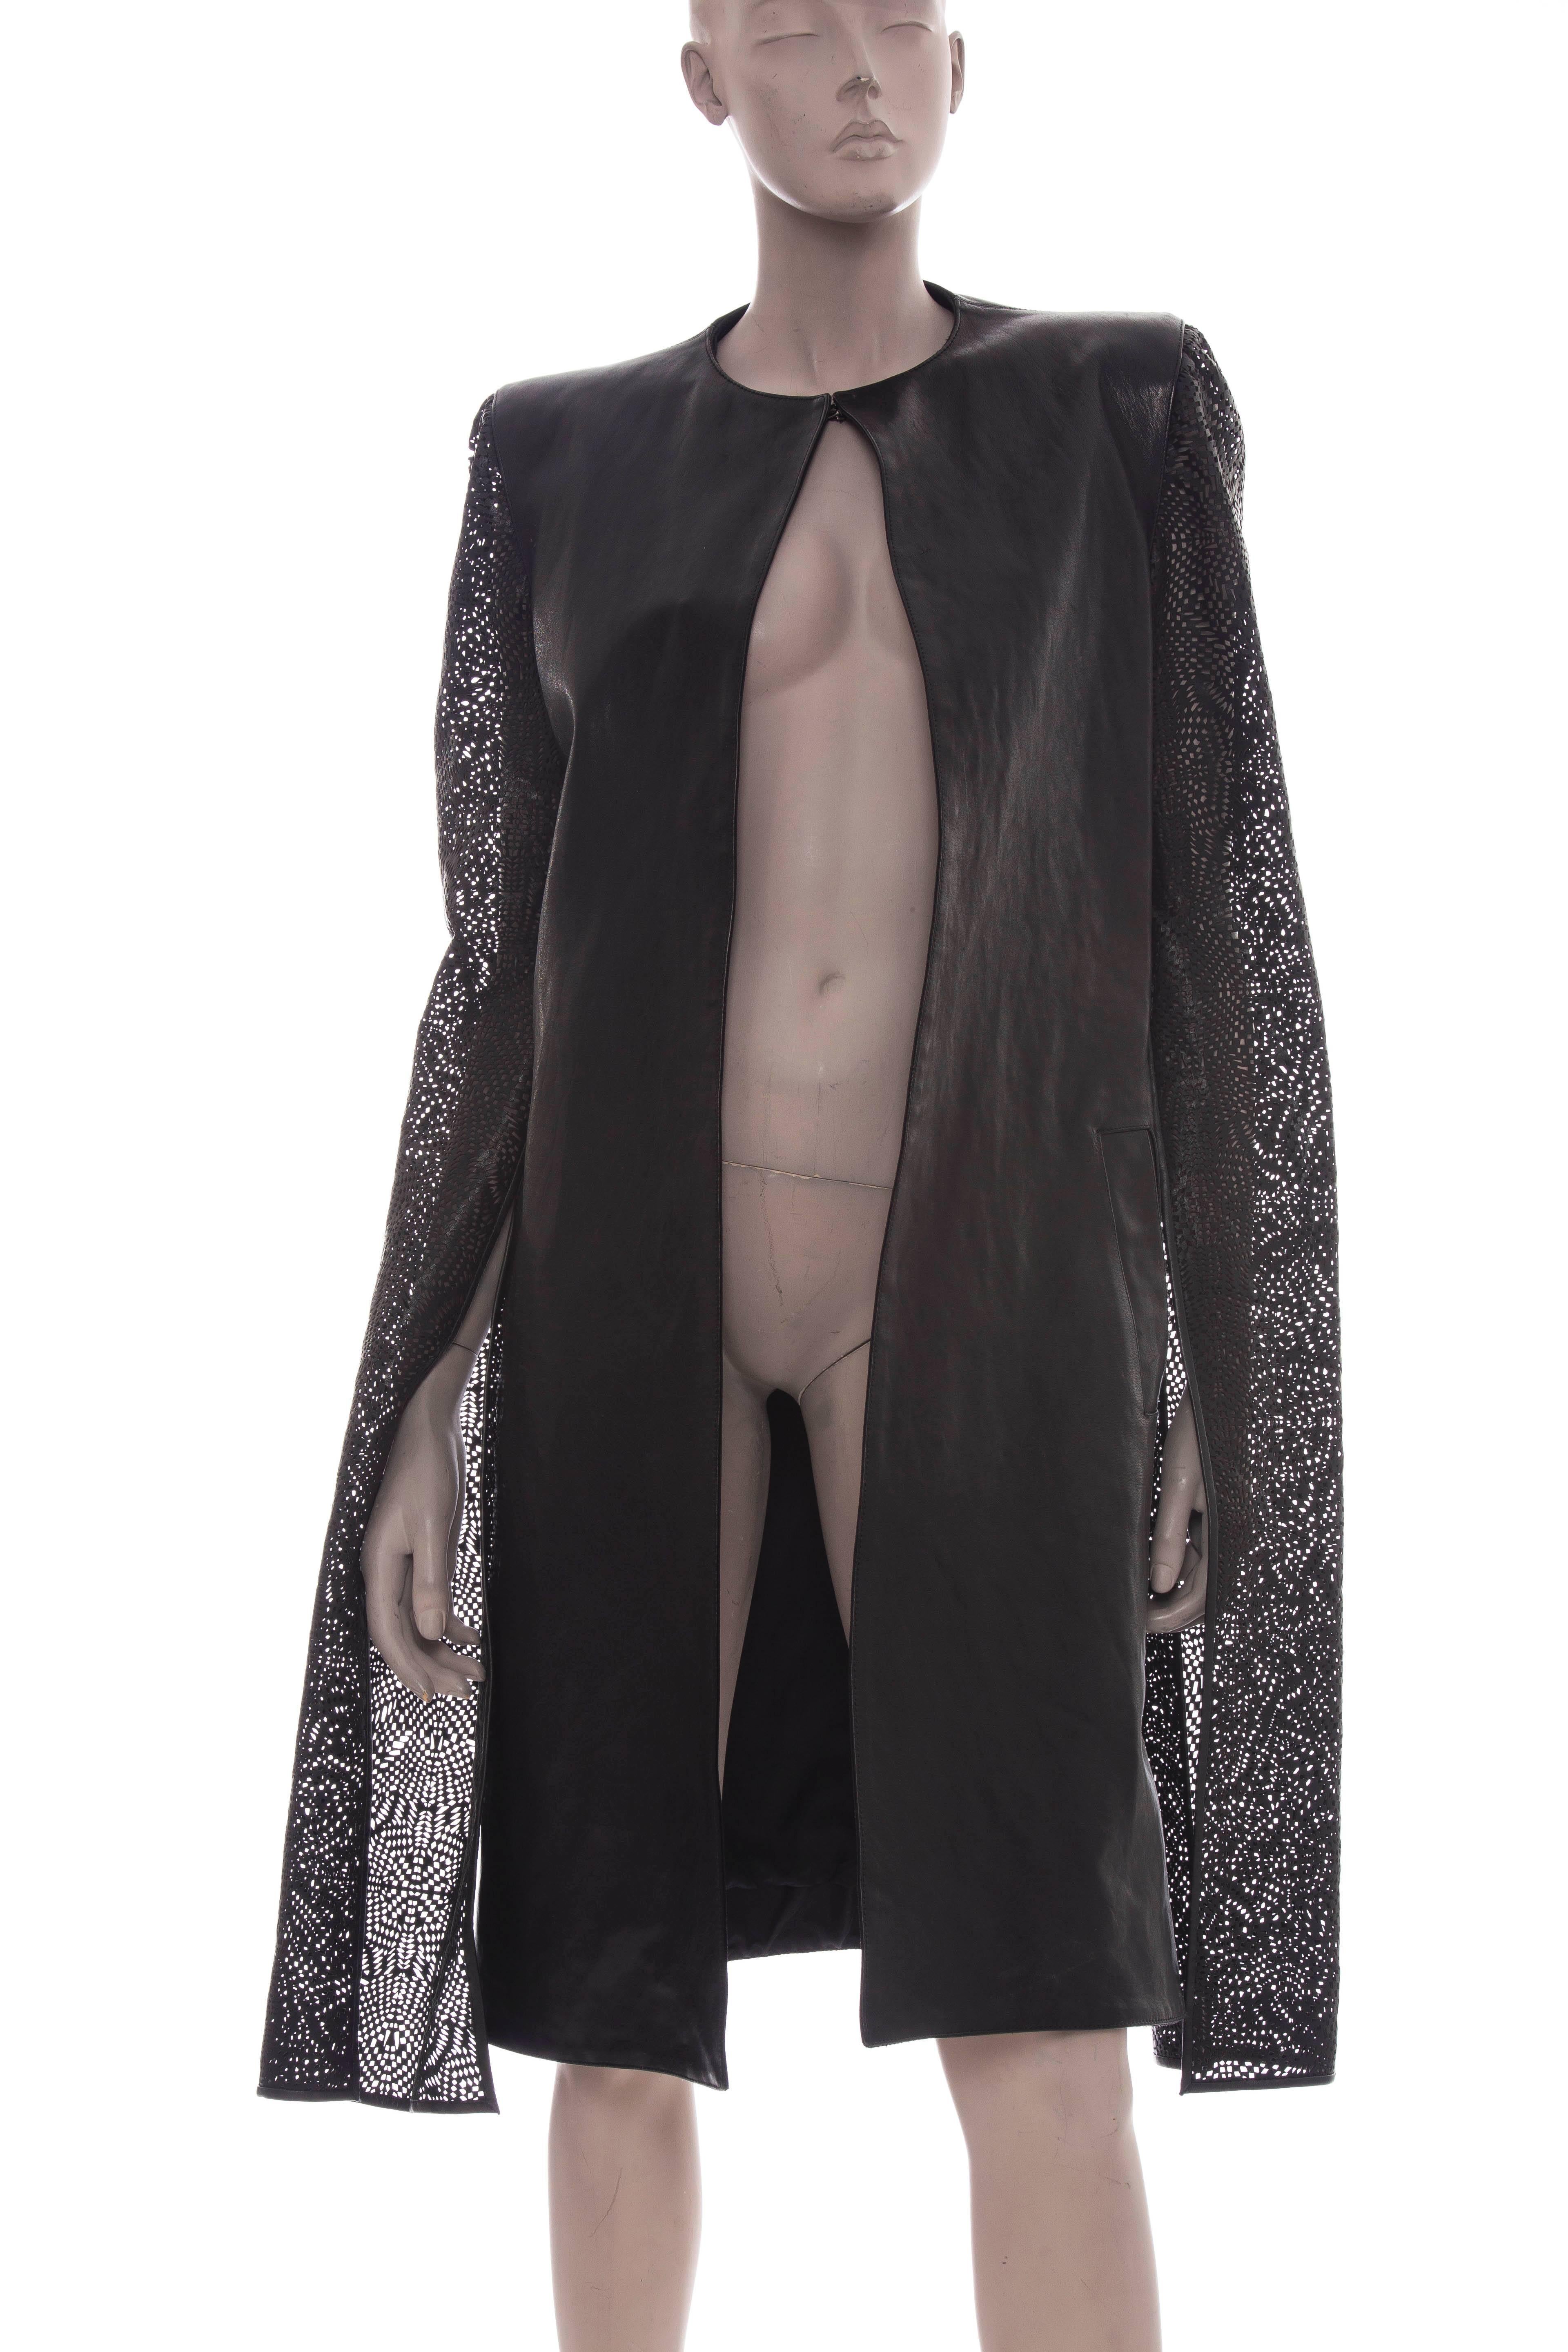 Gareth Pugh, Spring 2013, black leather coat with elongated laser cut sleeves, pleating at back, seam pockets and hook closure at collar.

IT 46
US 10
Bust 36”, Waist 34”, Shoulder 16”, Length 39”, Sleeve 42”